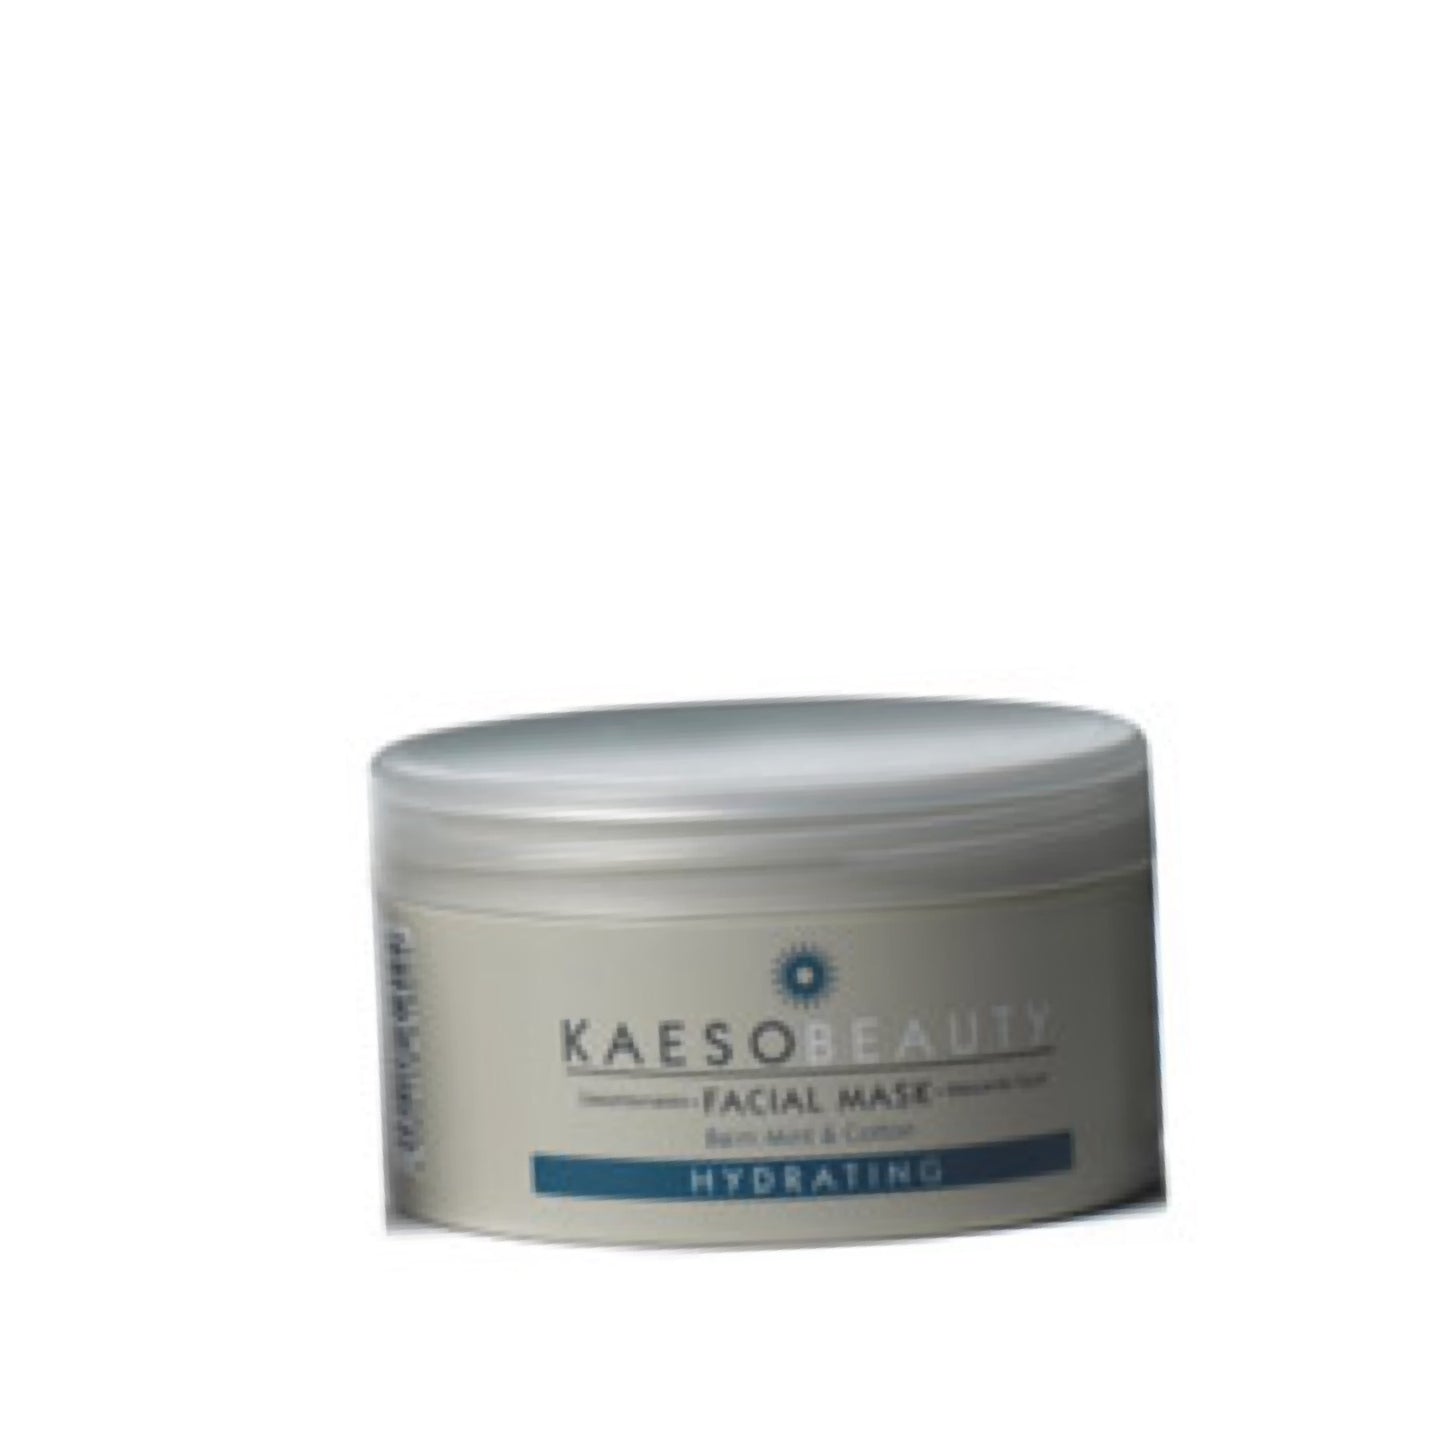 KAESO Hydrating Face Mask  95ml  & 245ml (Normal or Dry Skin)